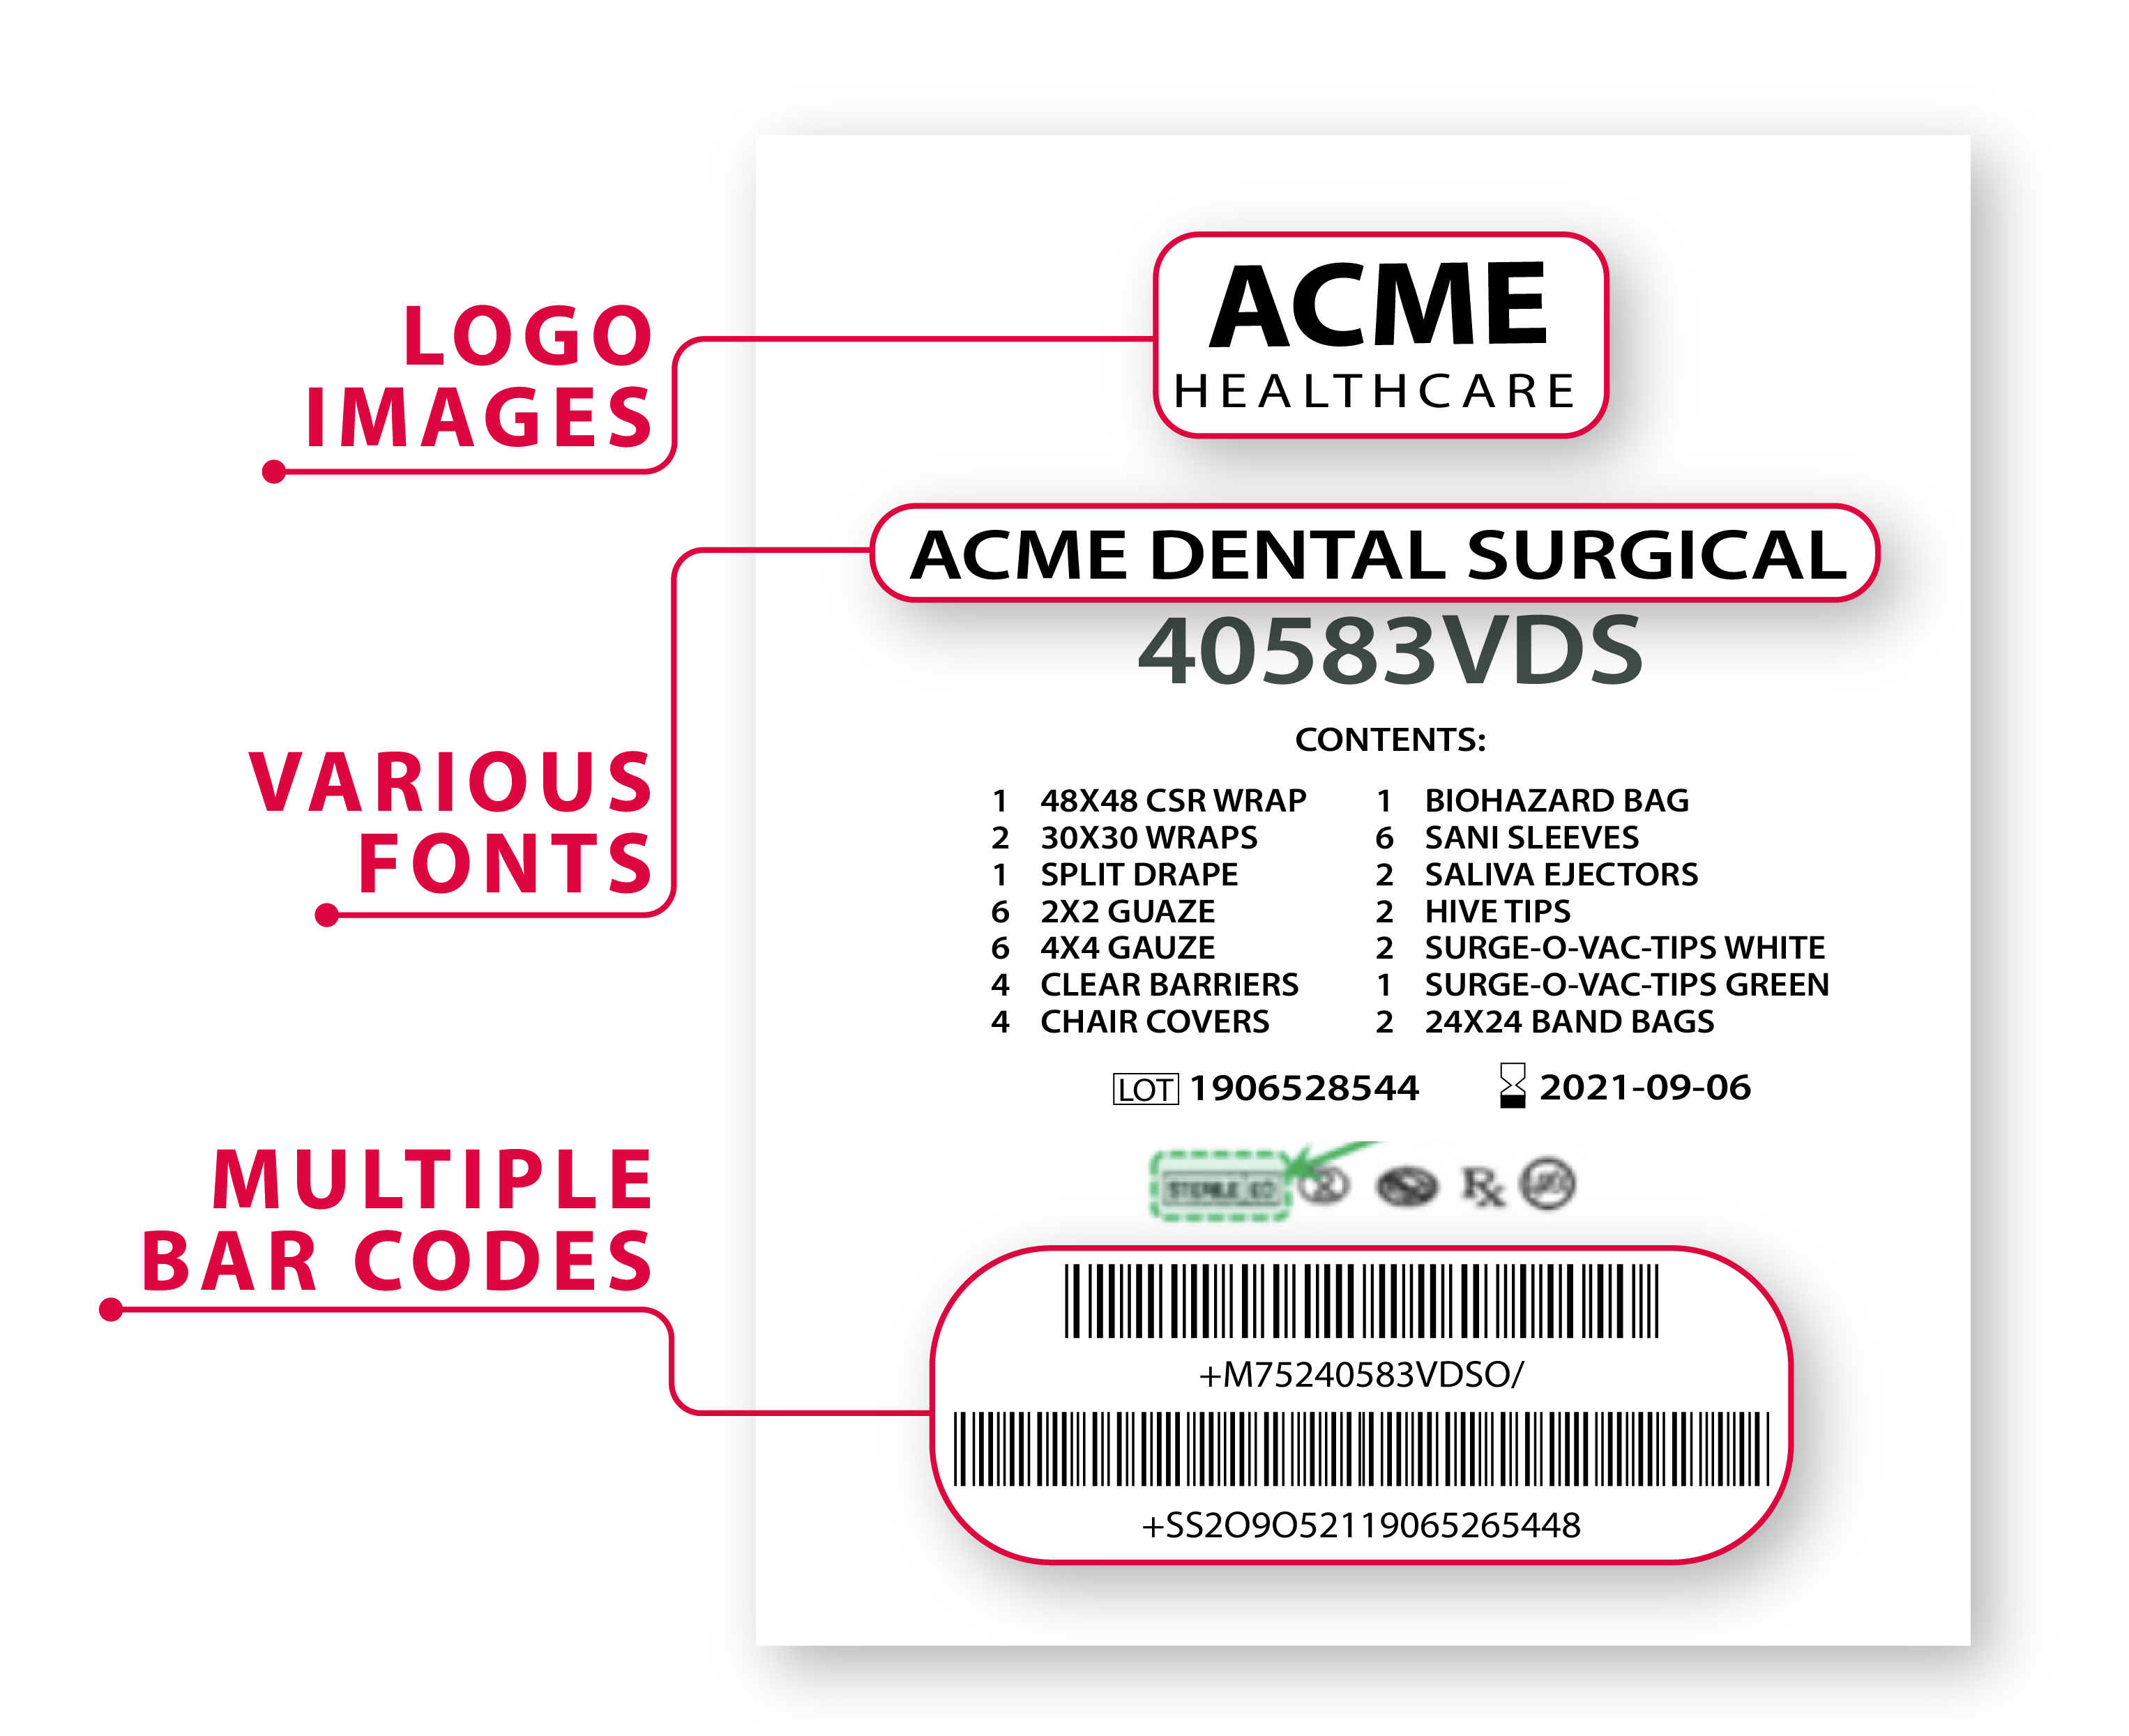 printing label with logo images various fonts and multiple barcodes